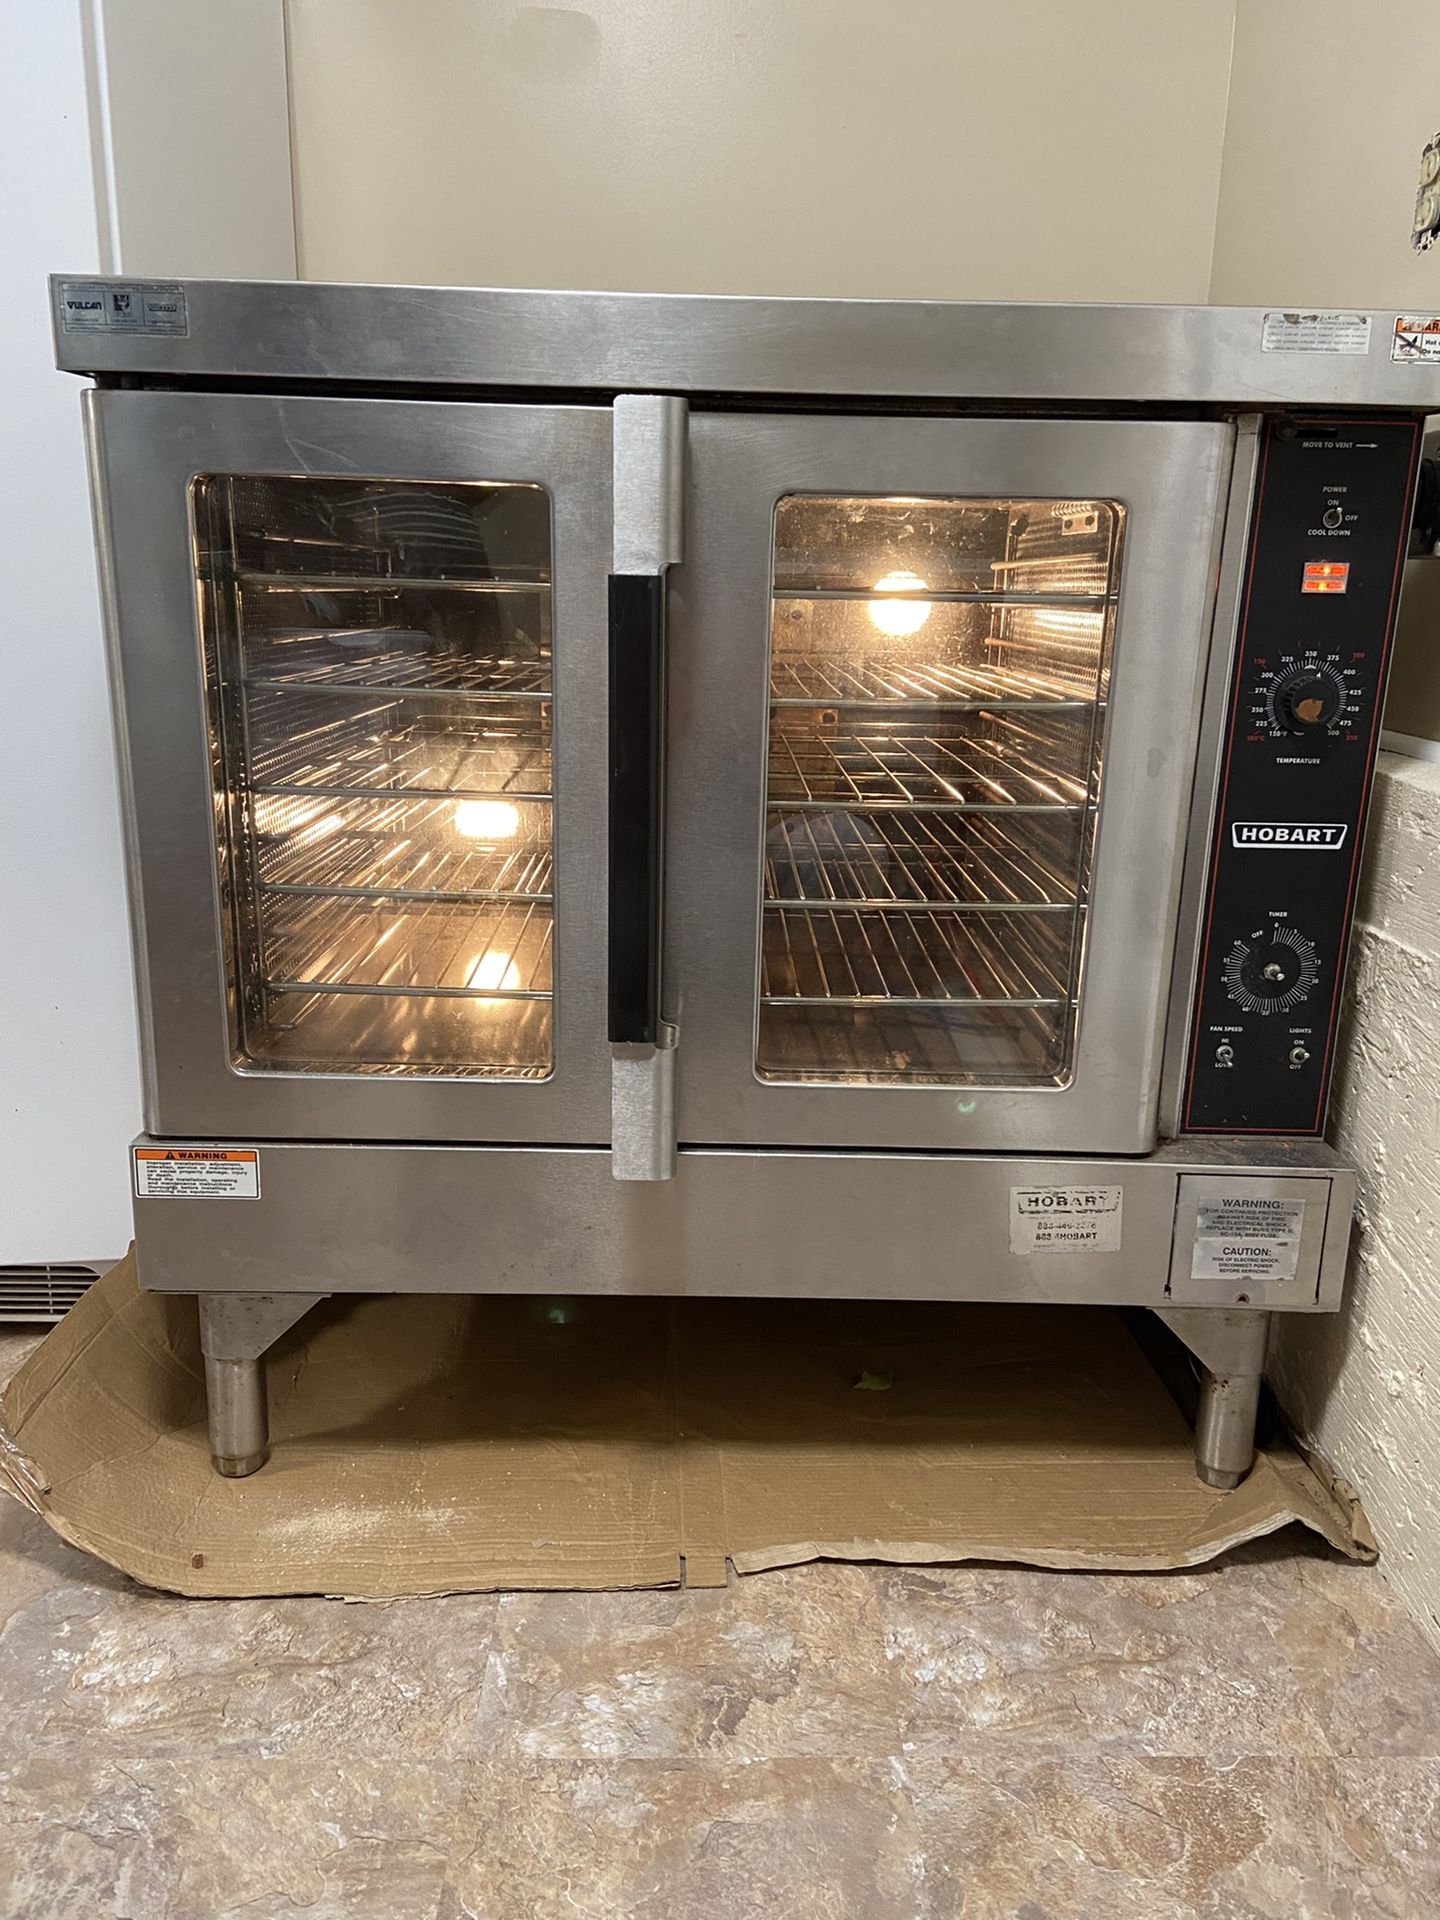 Commercial Electrical Oven